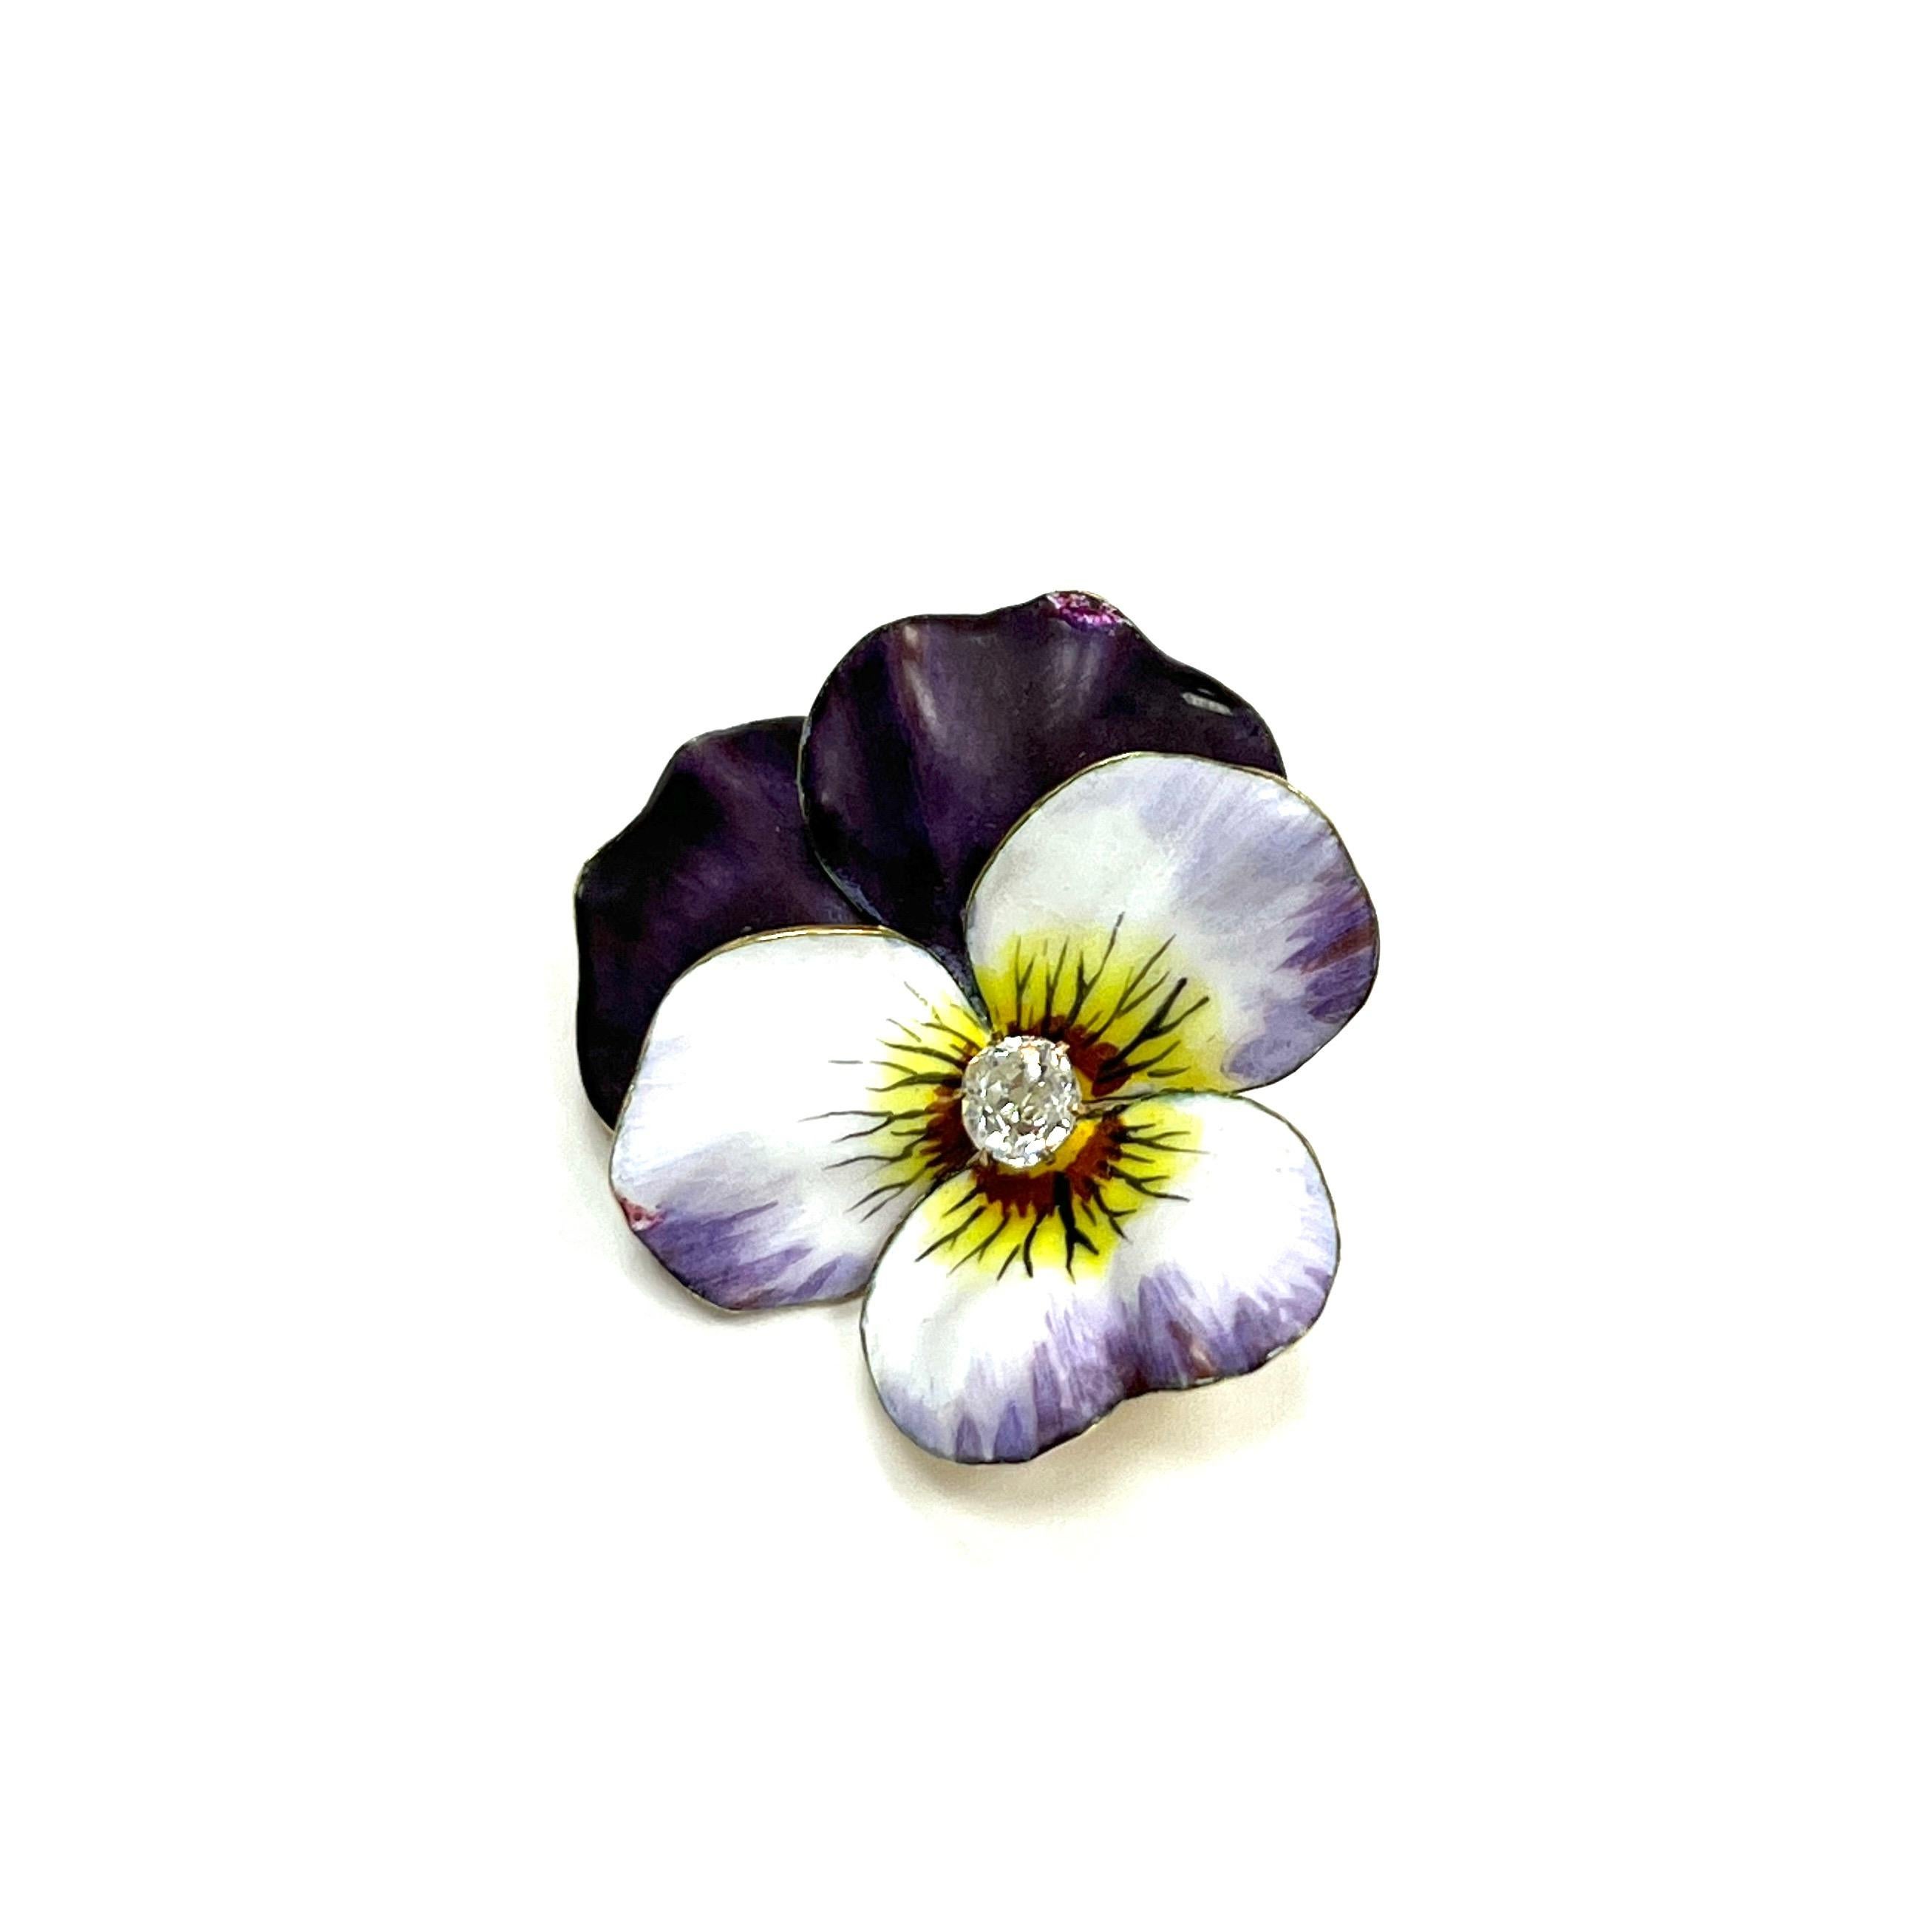 Art nouveau purple pansy enamel brooch

At the center is one round-cut diamond, the petals are made of purple enamel set on yellow gold

Size: width 2.6 cm, length 2.9 cm
Total weight: 8.2 grams